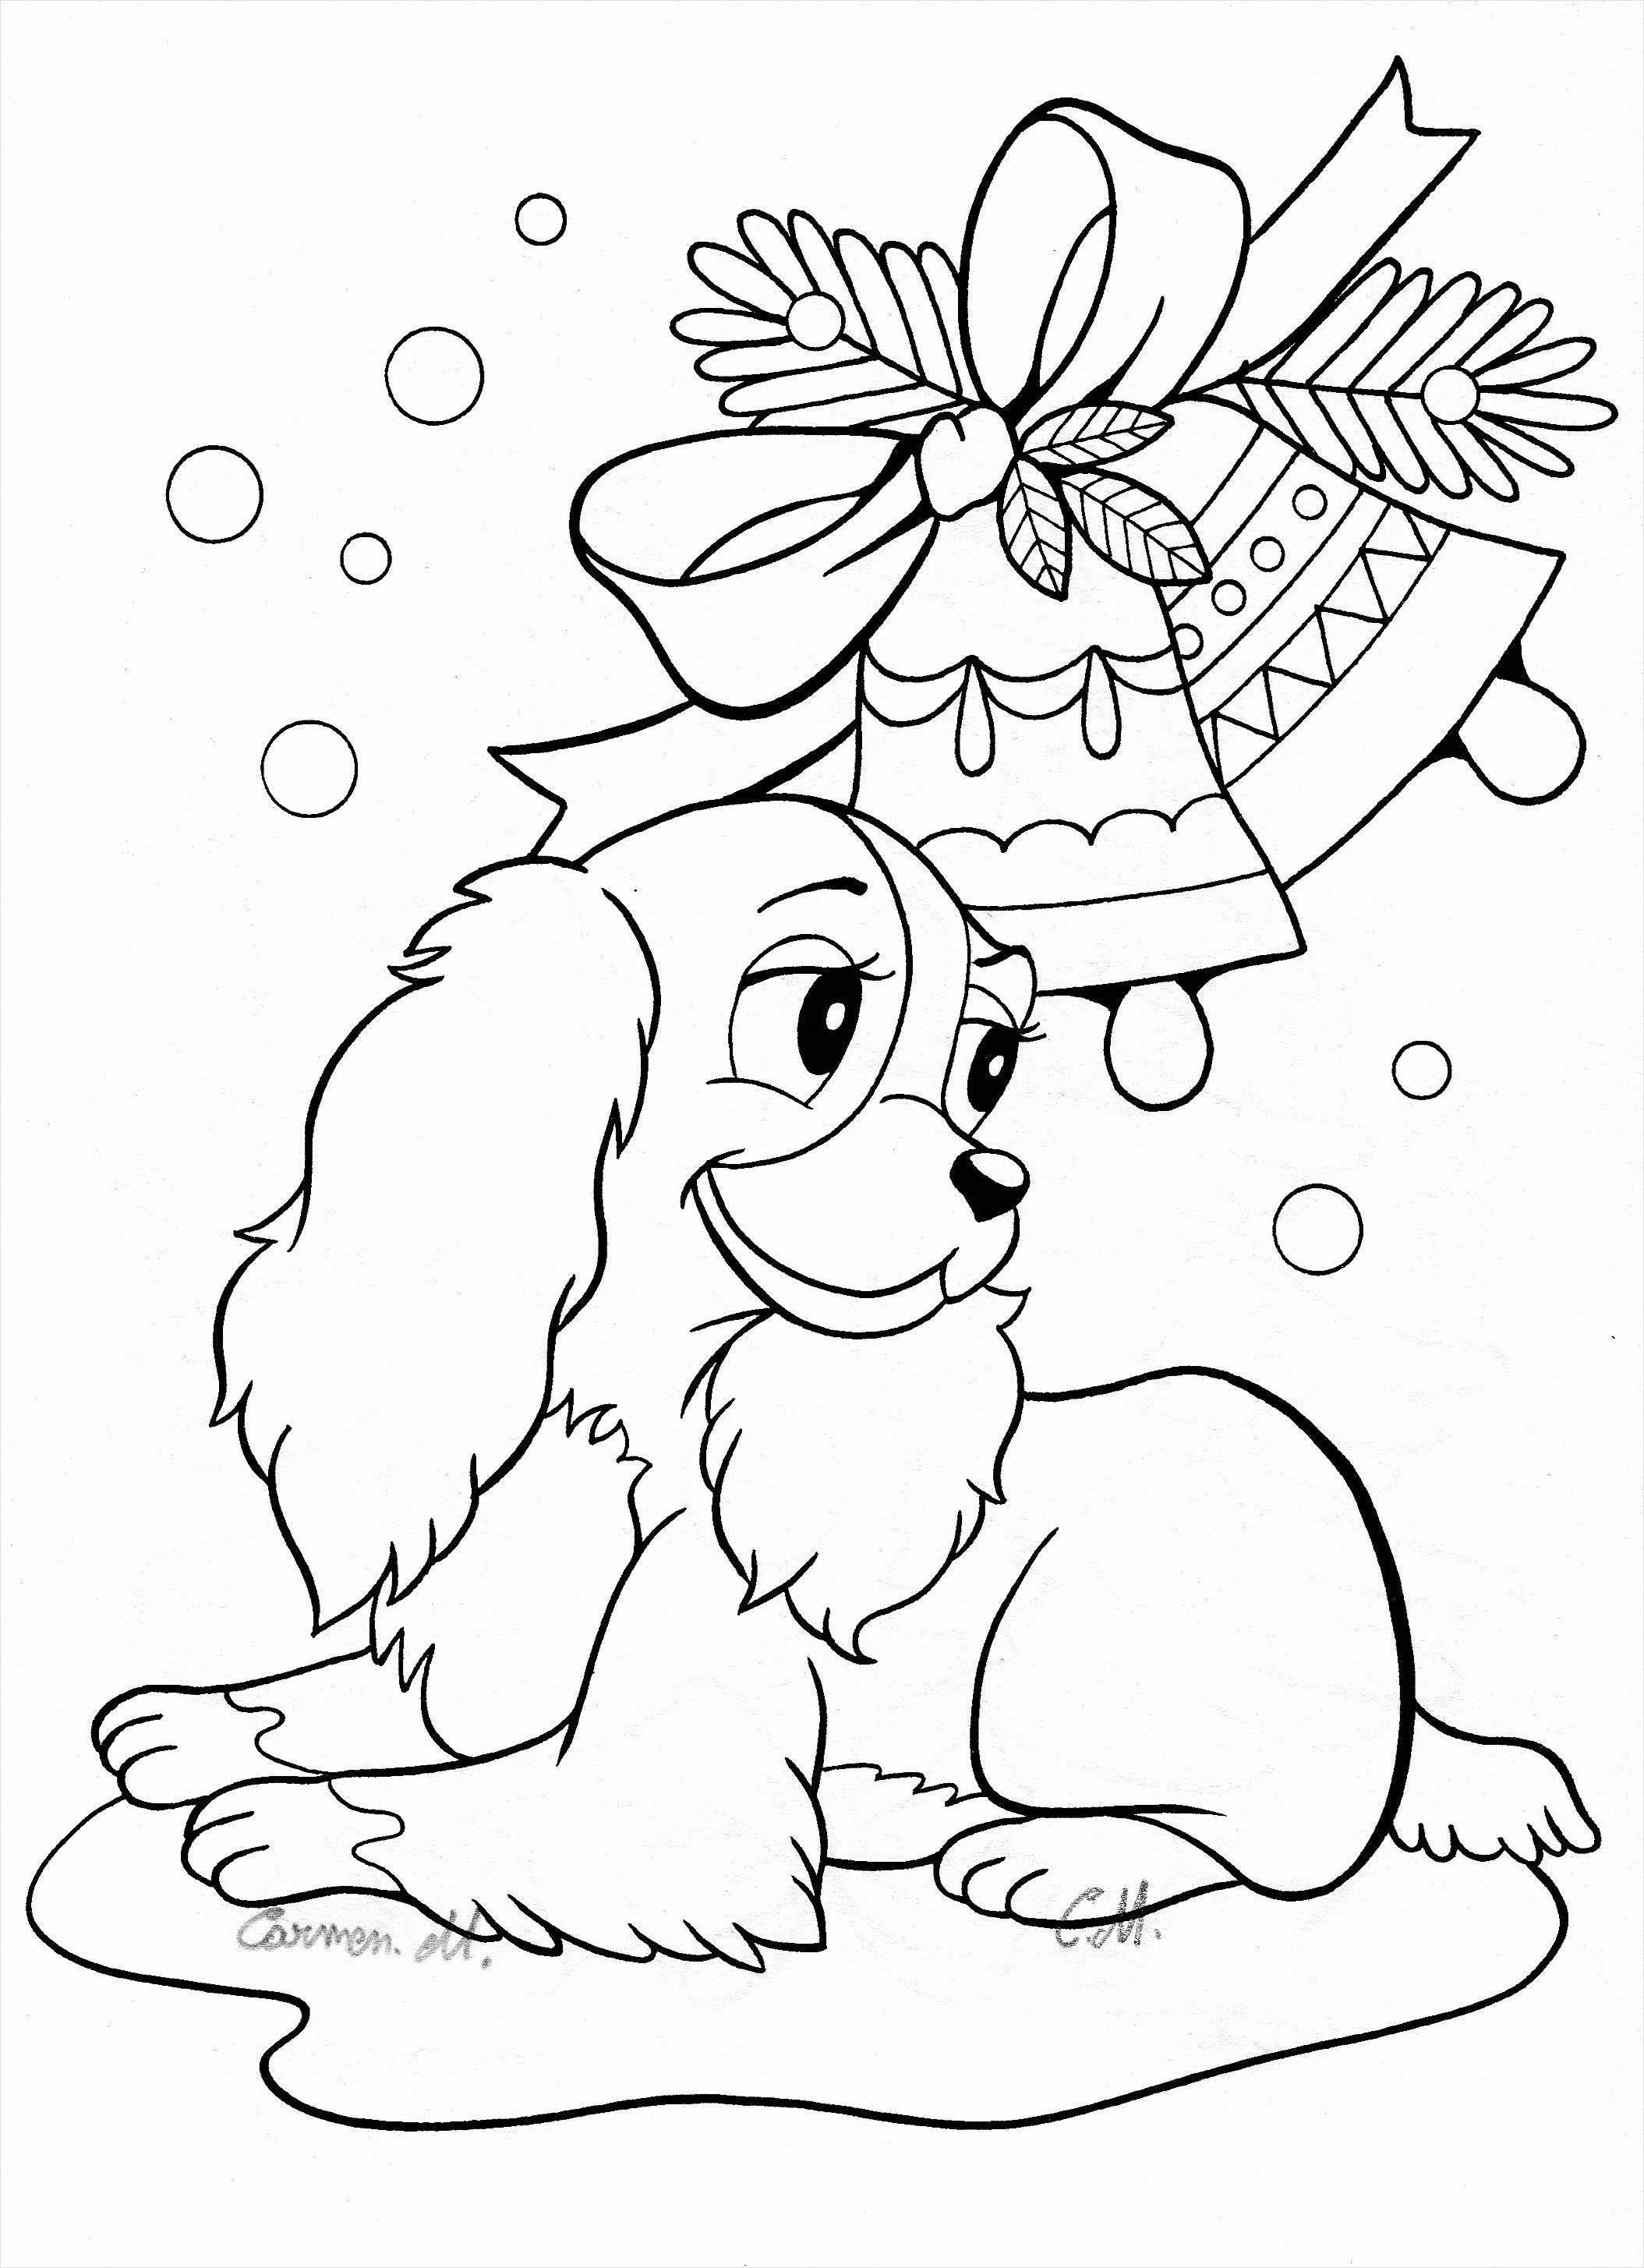 Animals Coloring Pages to Print New Fresh Coloring Pages Cute Animals Unique Printable Od Dog Coloring